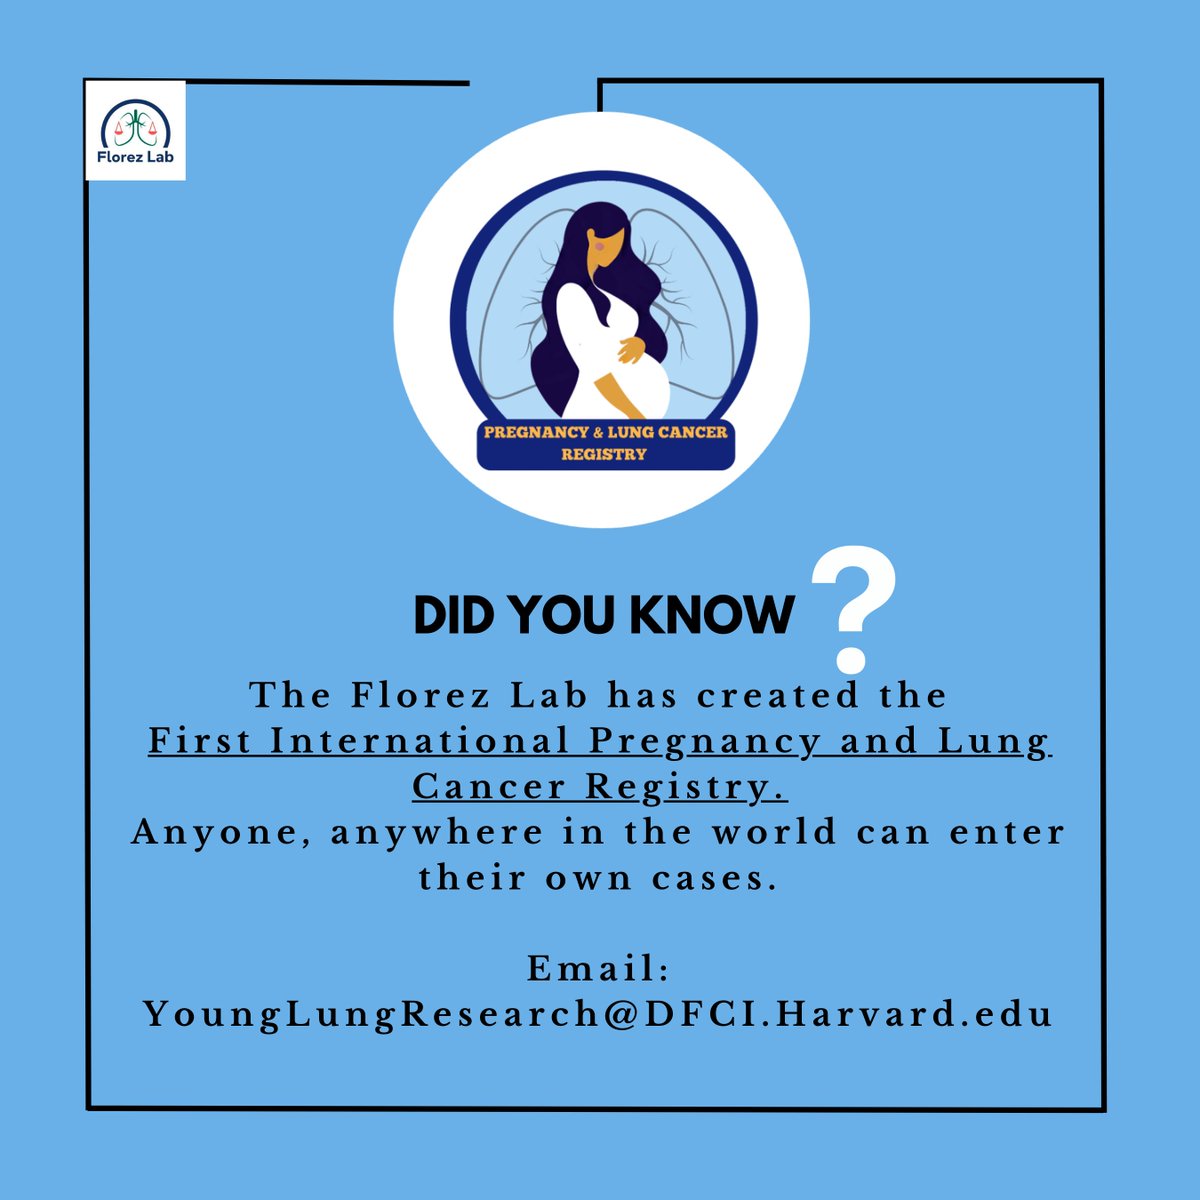 @YoungLungCancer @NarjustFlorezMD @AbioyeOyepejuMD @AnaVManana @esinghimd @DanaFarber @EGFRResisters @OncogeneCancer @leahlphillips @breathofhopeky 11/ Pregnancy & Lung Cancer⁉️ 🔑 The FIRST International Pregnancy and Lung Cancer Registry has been created by the #FlorezLab! 🔑 Anyone, ANYWHERE in the world can enter their own cases! 🔑 Email us📩: YoungLungResearch@DFCI.Harvard.edu acsjournals.onlinelibrary.wiley.com/doi/10.1002/cn…